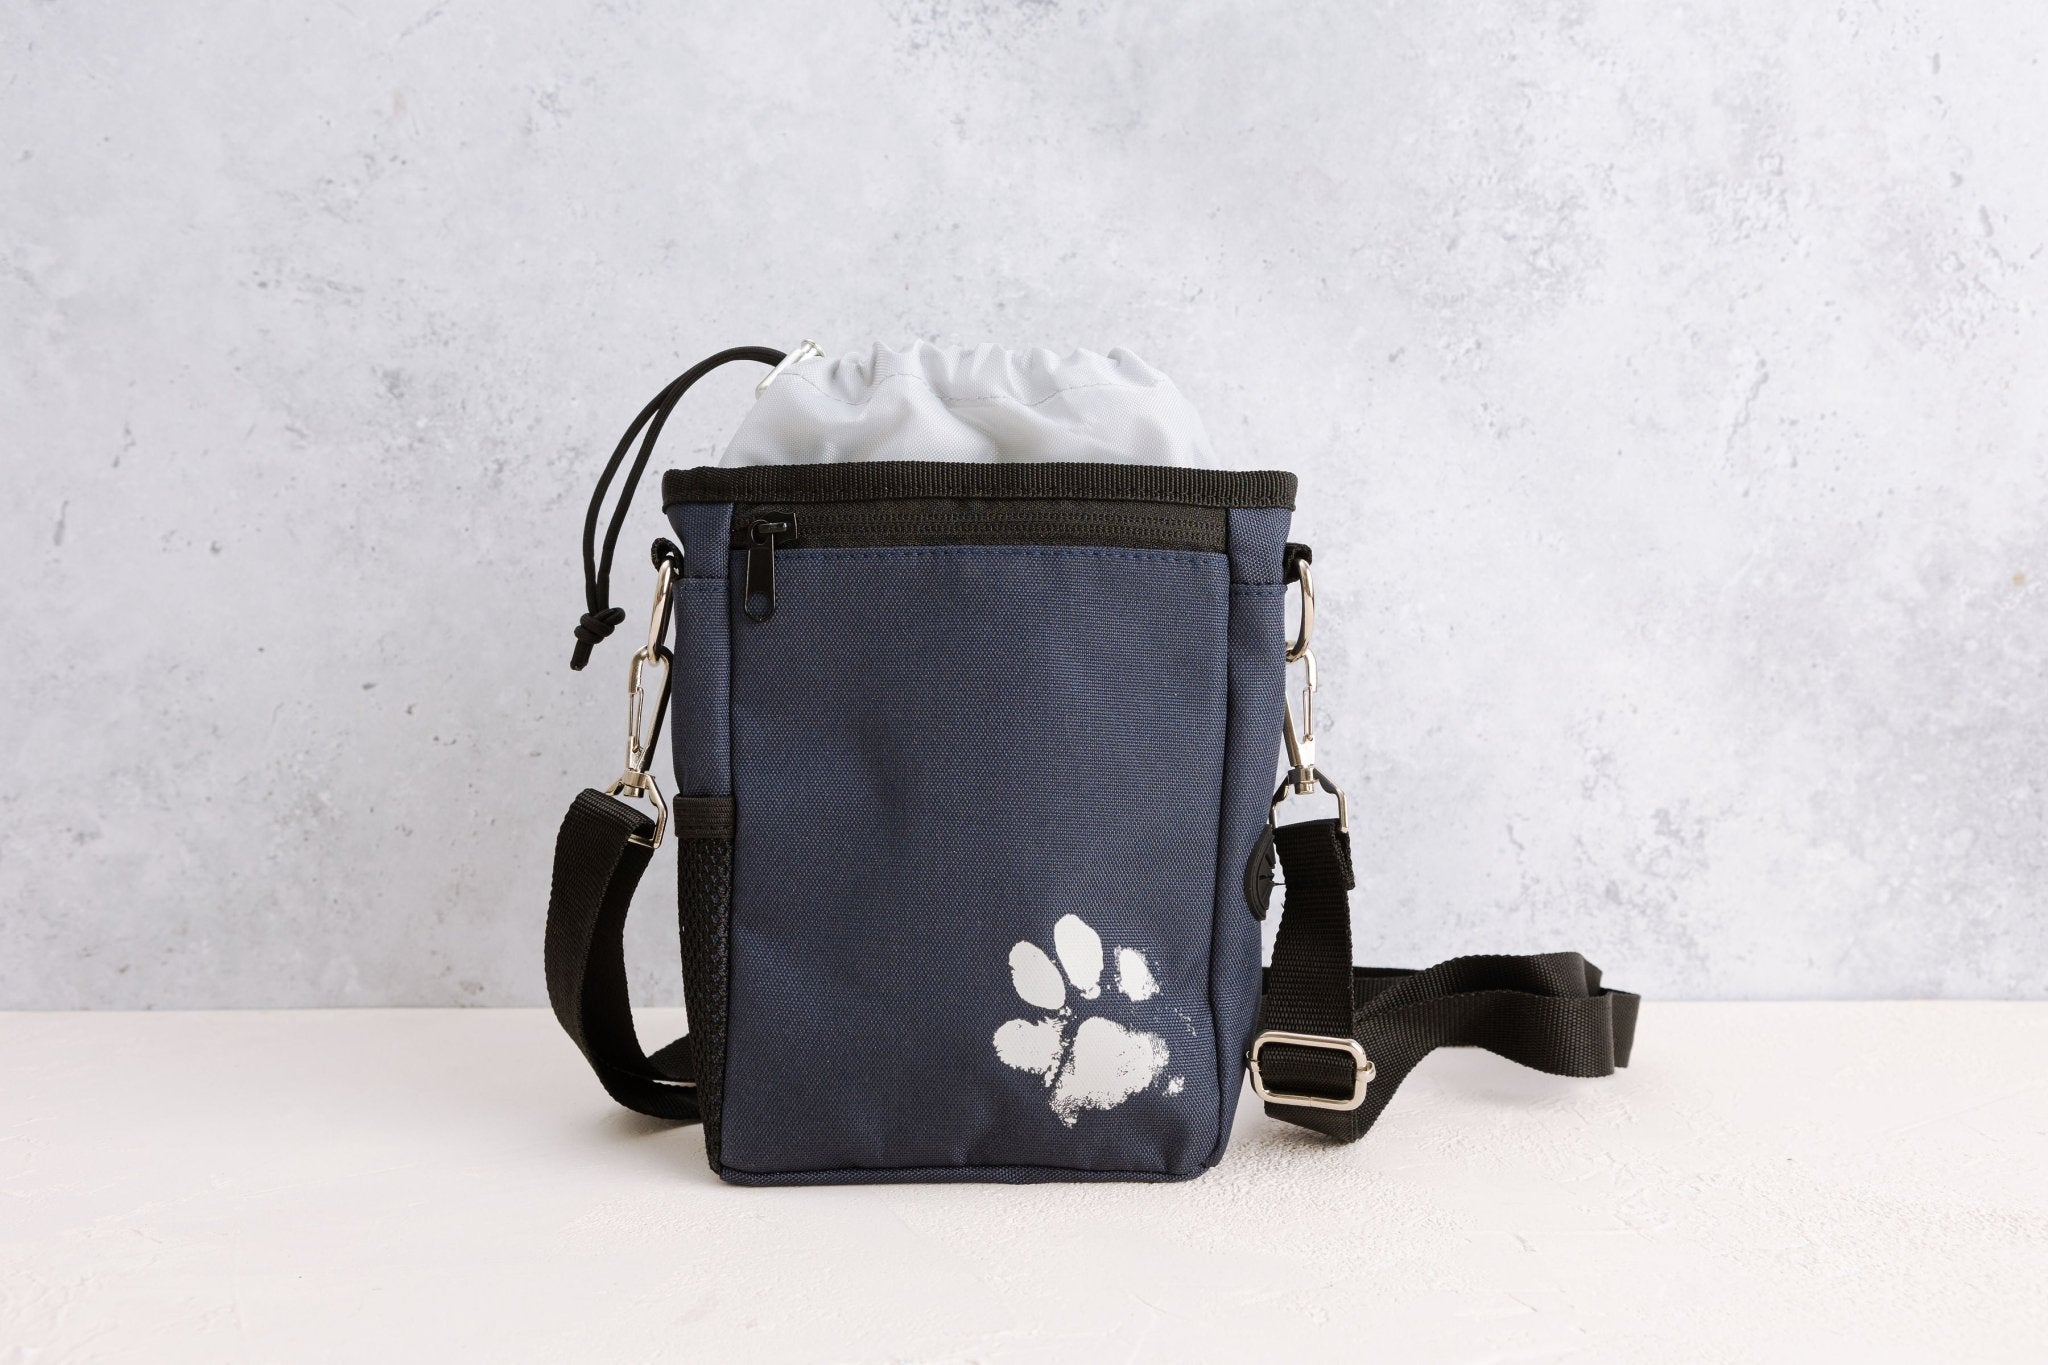 Dog Treat Pouch & Walking Bag made of Recycled Plastic - Pet Impact